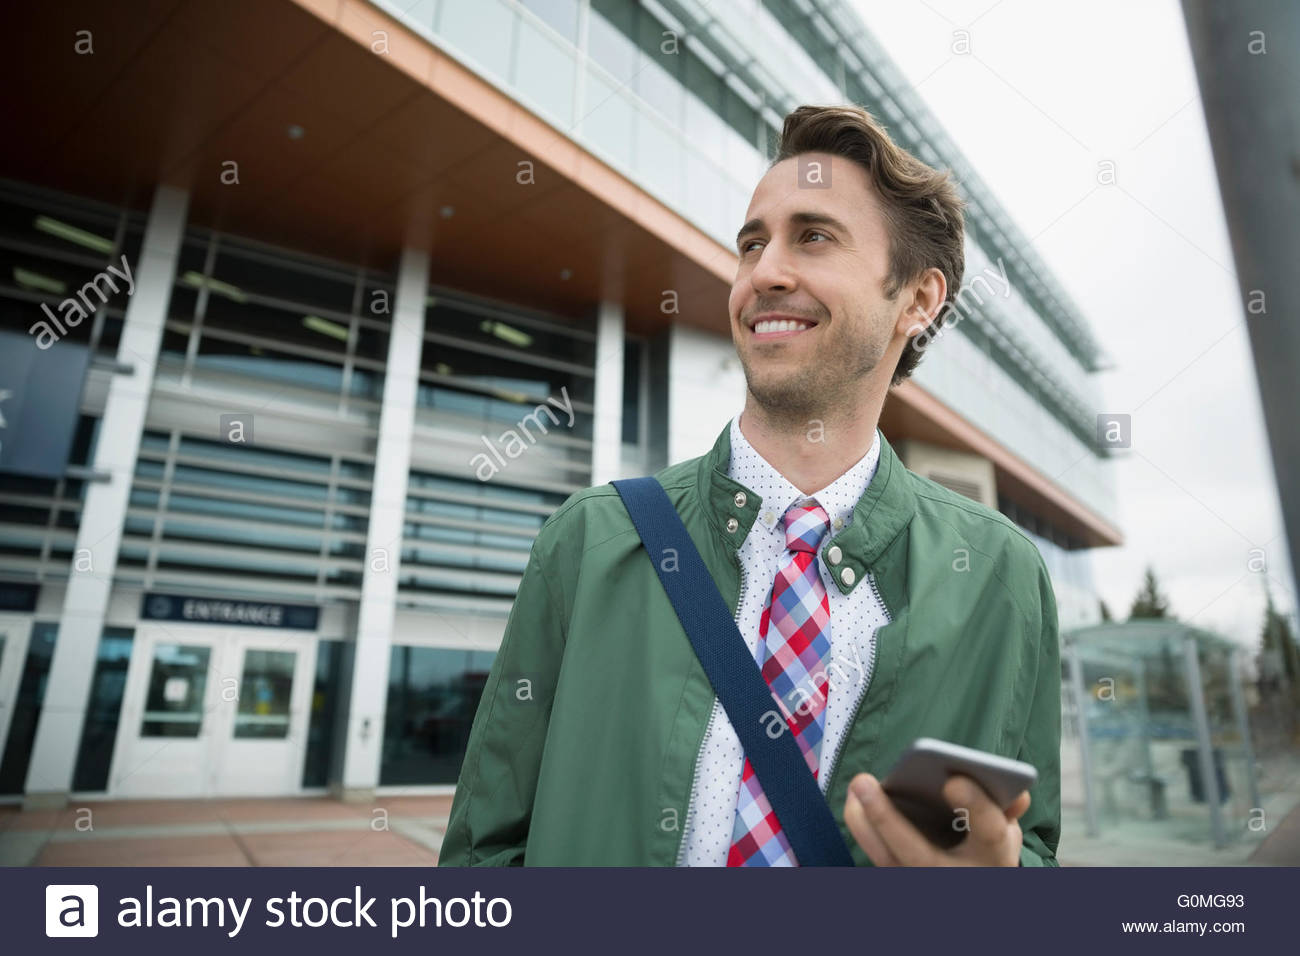 Smiling businessman with cell phone outside train station Stock Photo